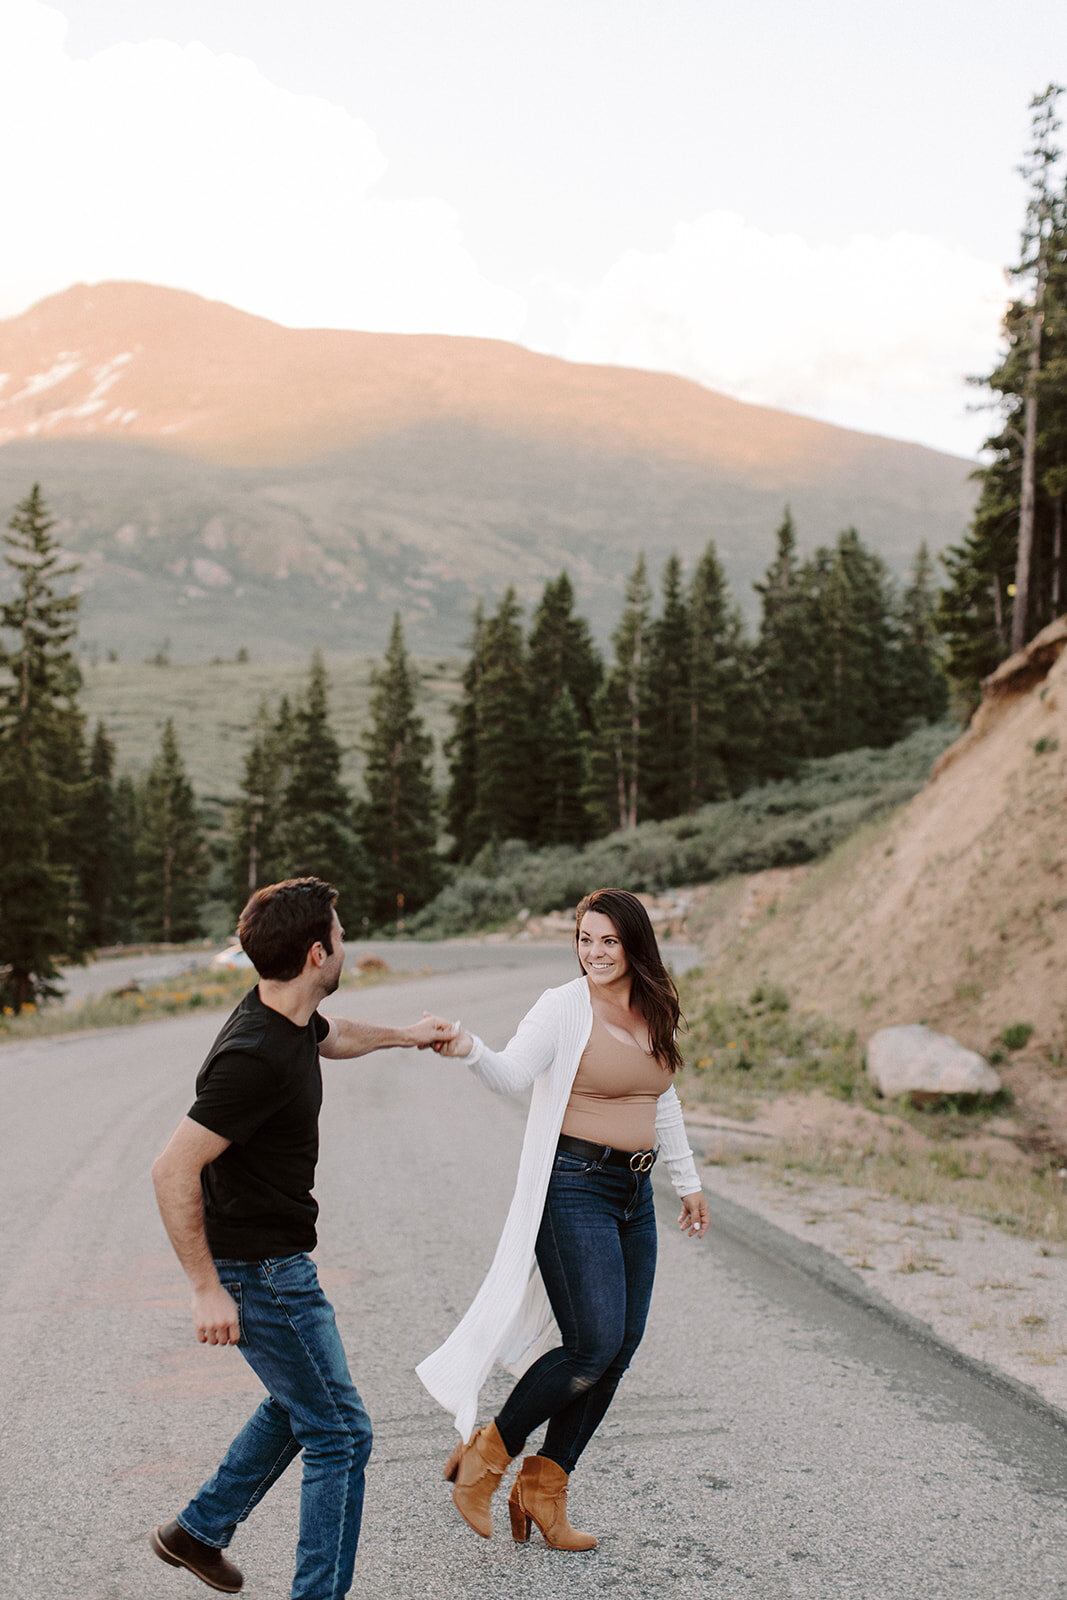 kylie & nick engagements _ cait swithers photo + films-242_websize